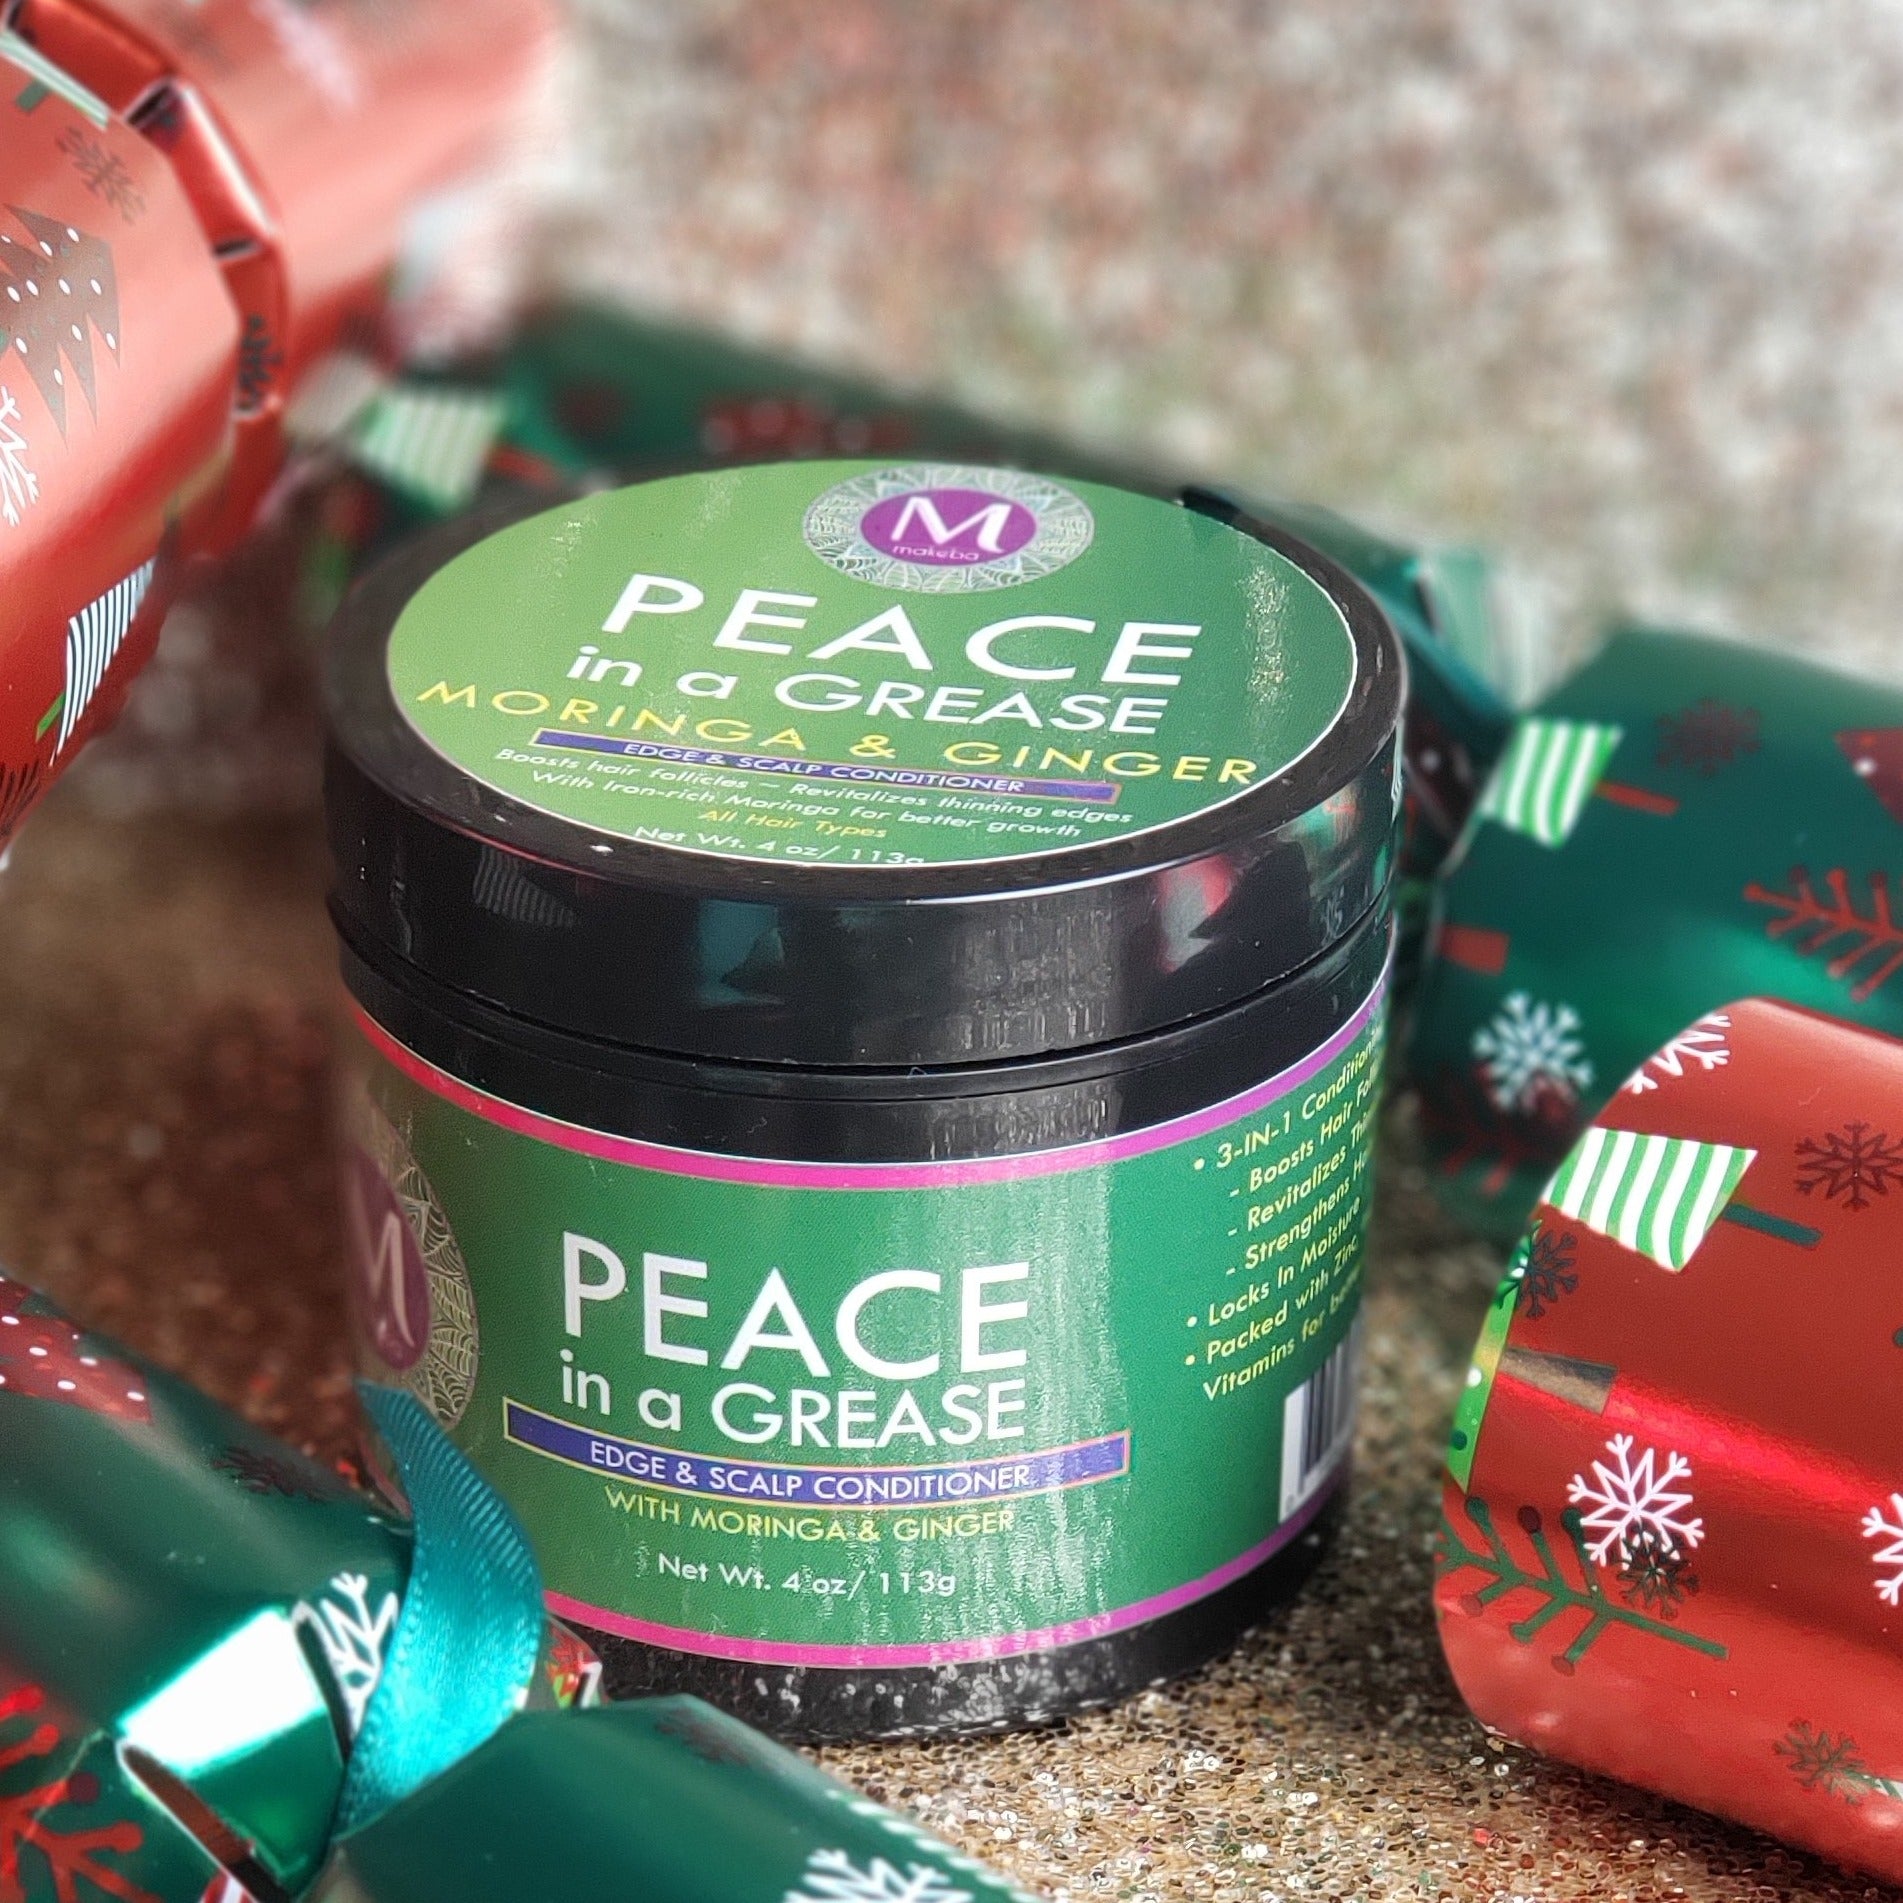 PEACE in a GREASE Edge & Scalp Conditioner